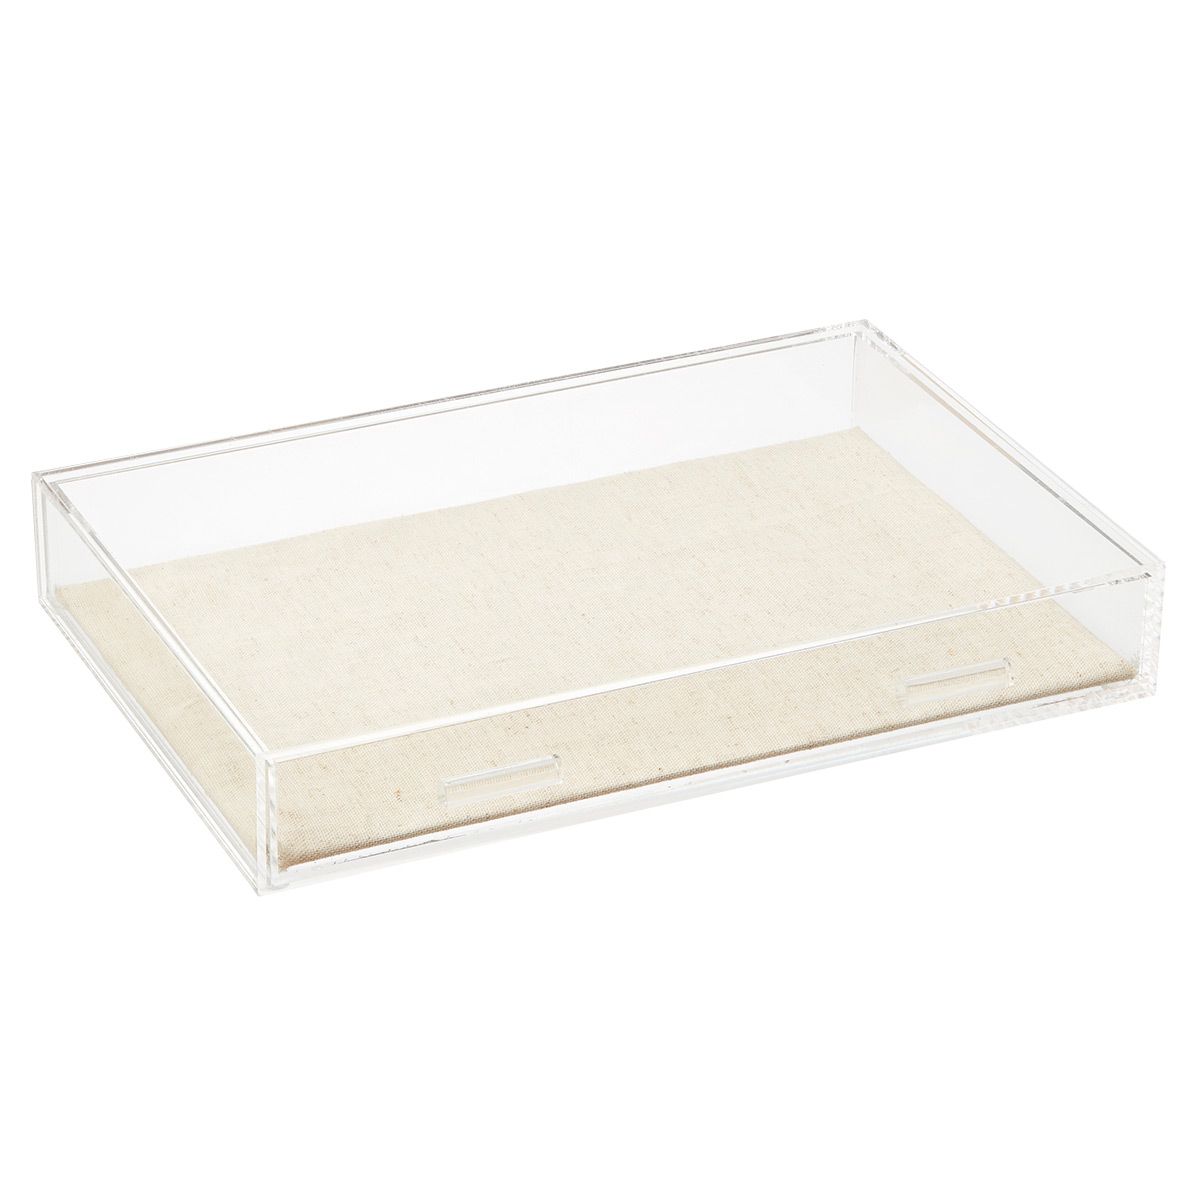 Wide Acrylic Jewelry Drawer | The Container Store